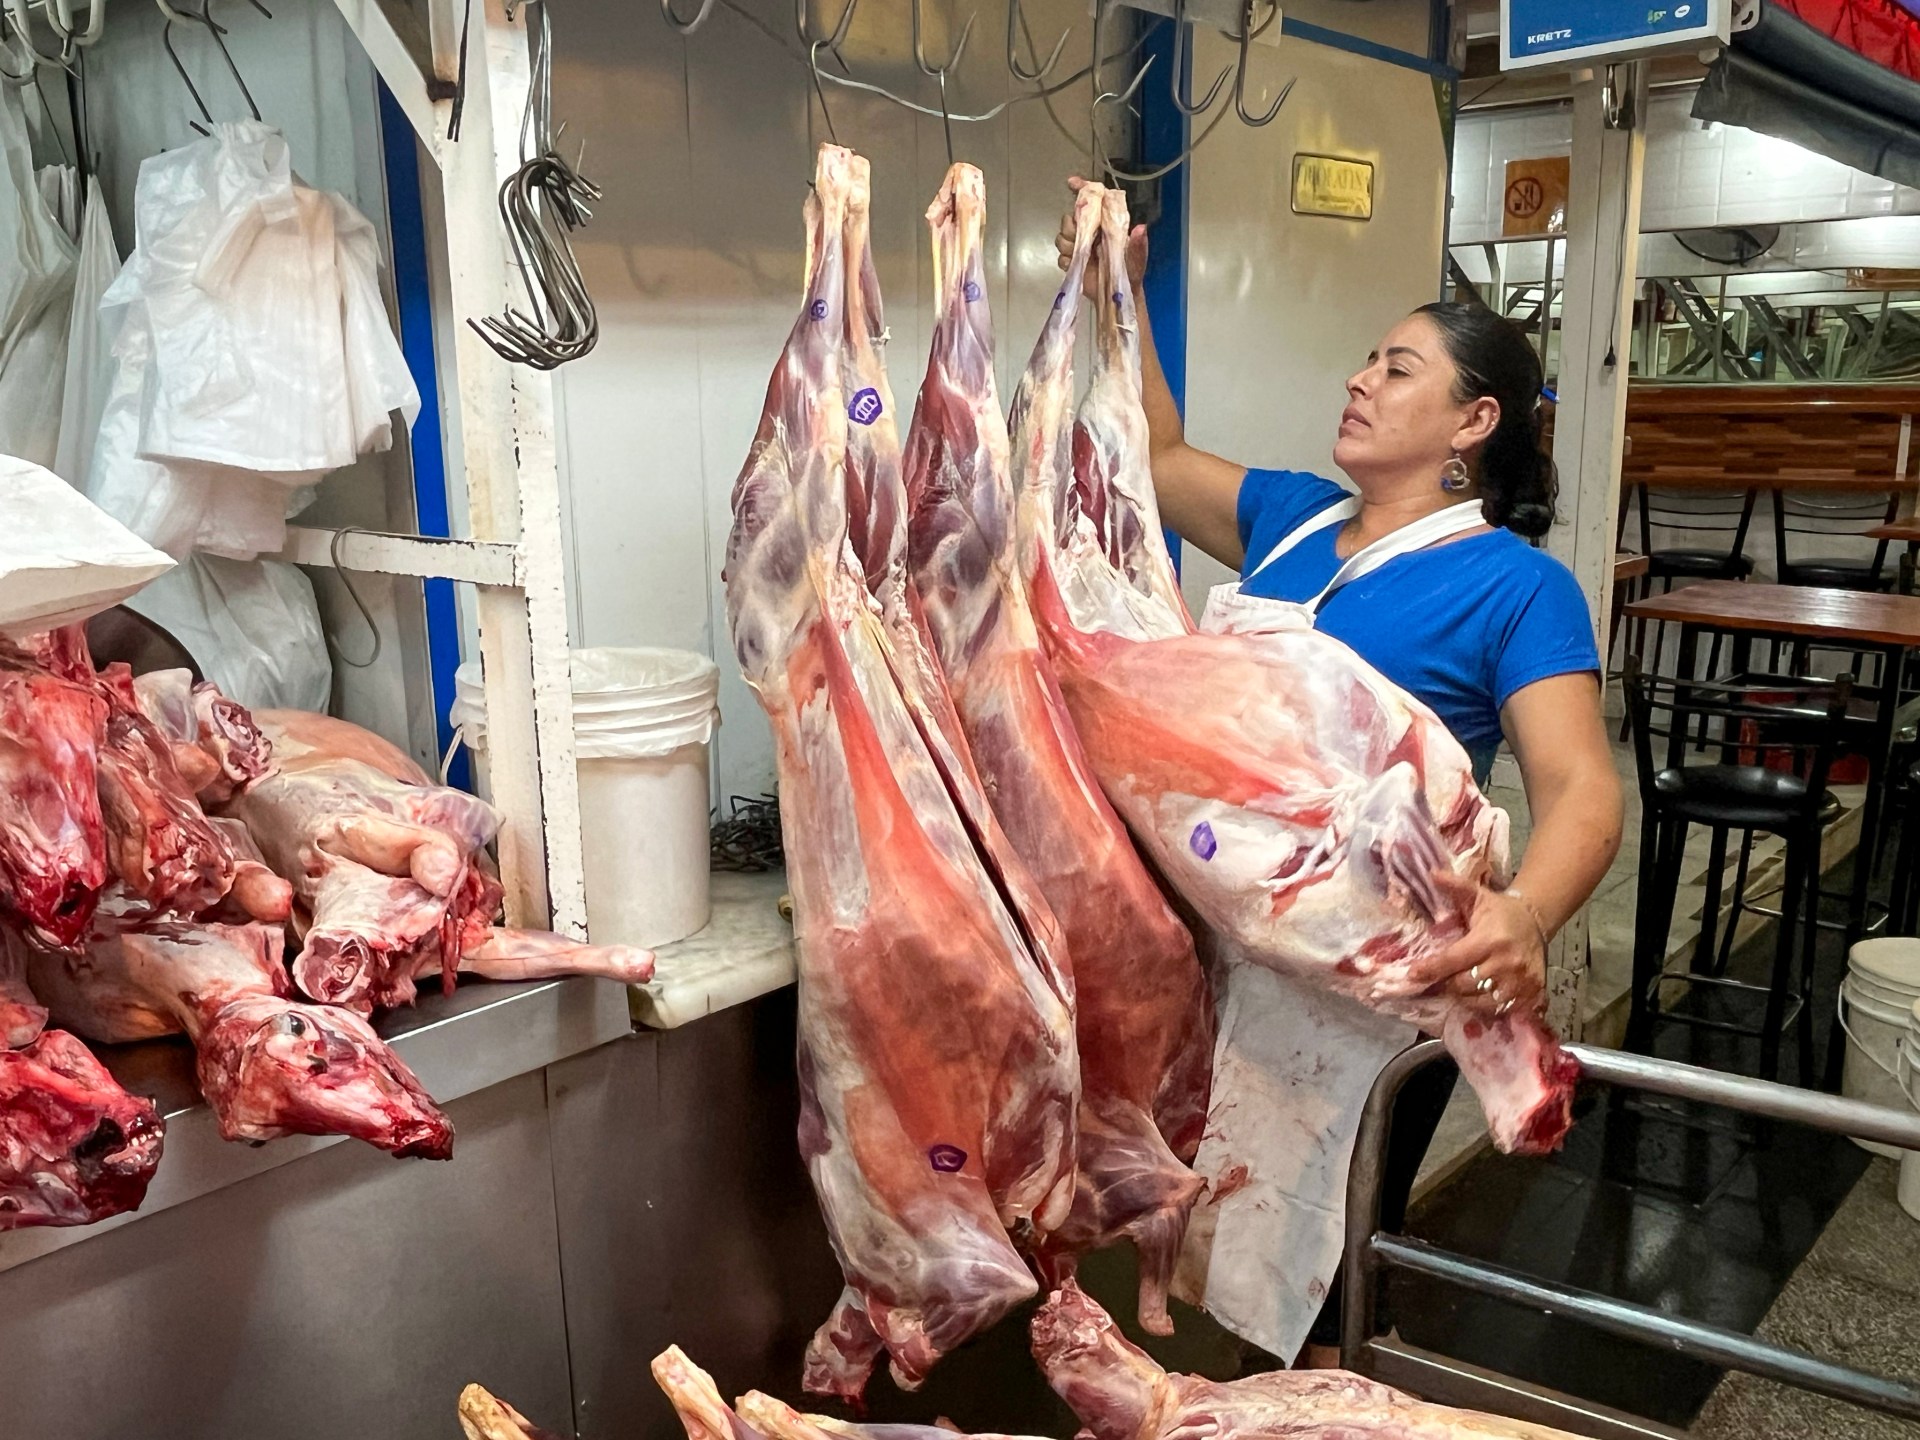 In steak-mad Argentina, women’s work is increasingly butchering the meat.